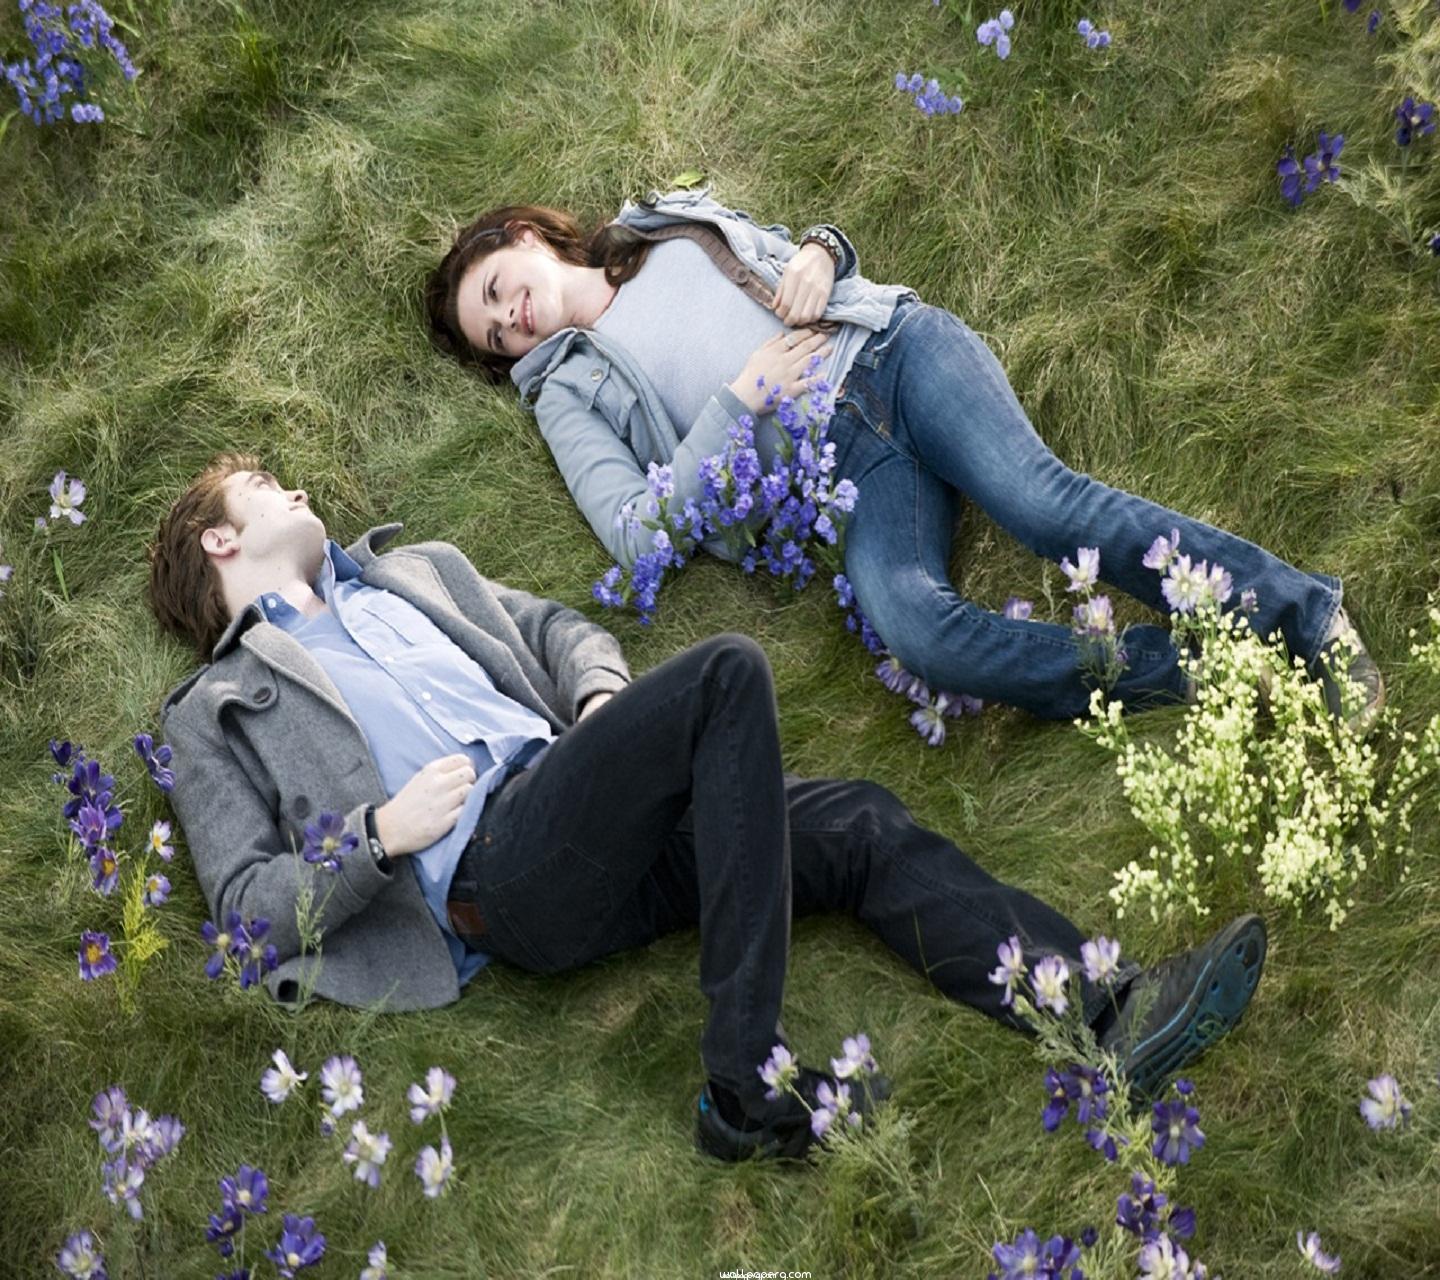 Download Edward and bella hd wallpaper for mobile - Romantic wallpapers for  your mobile cell phone